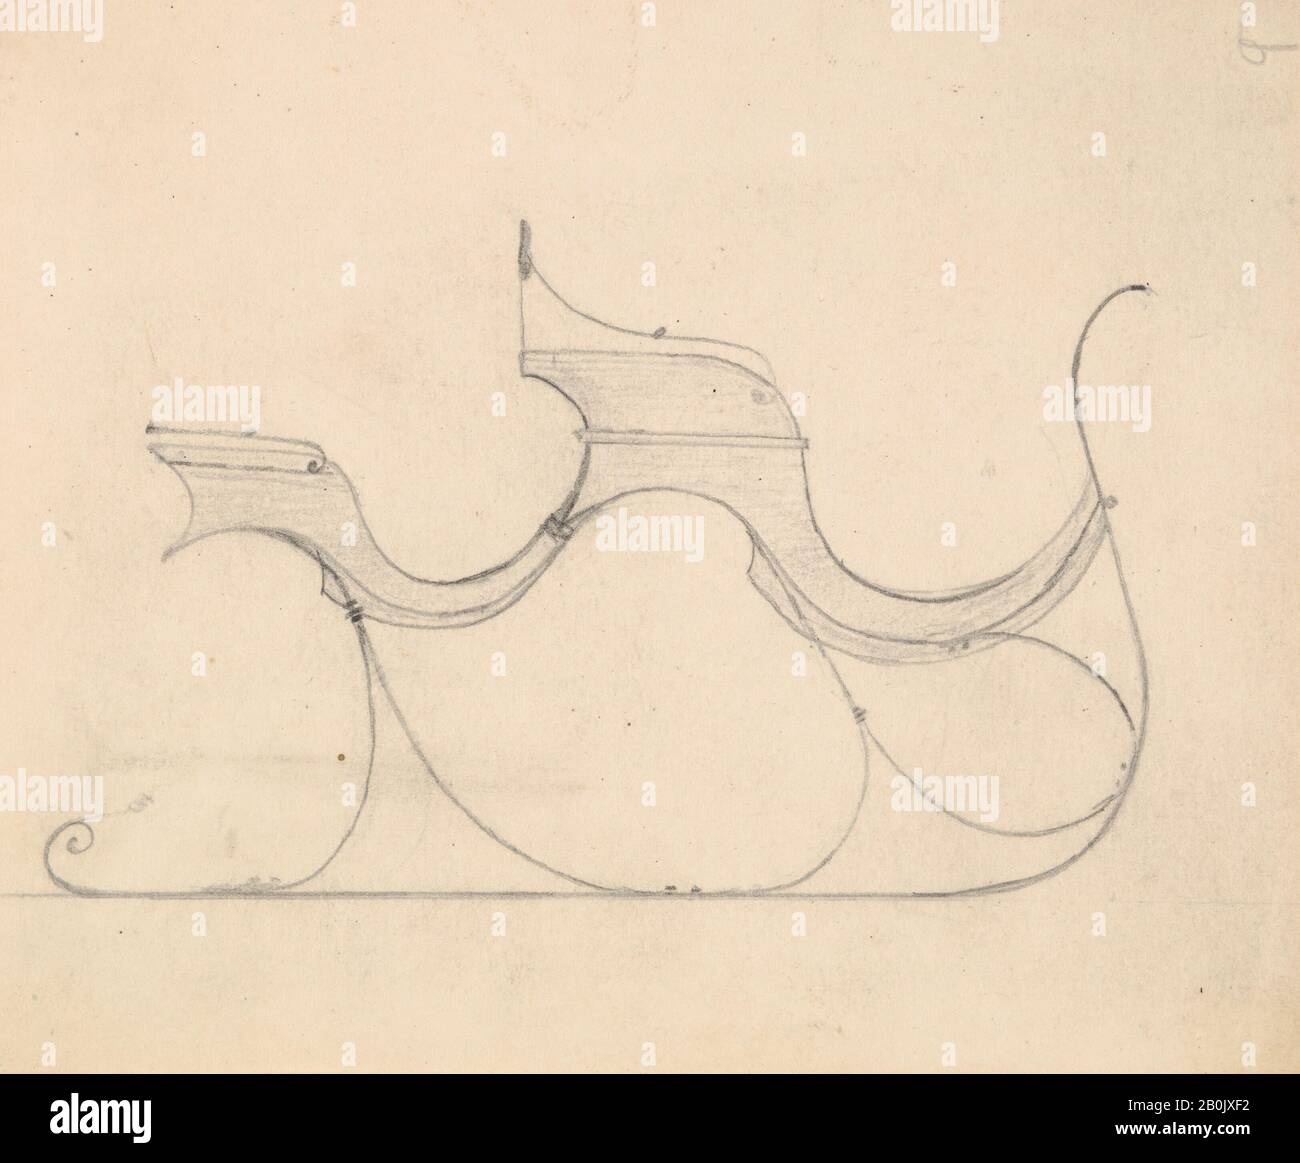 Brewster & Co., Sleigh, Brewster & Co. (American, New York), 1877, Graphite, sheet: 4 3/8 x 5 1/4 in. (11.1 x 13.3 cm), Drawings Stock Photo